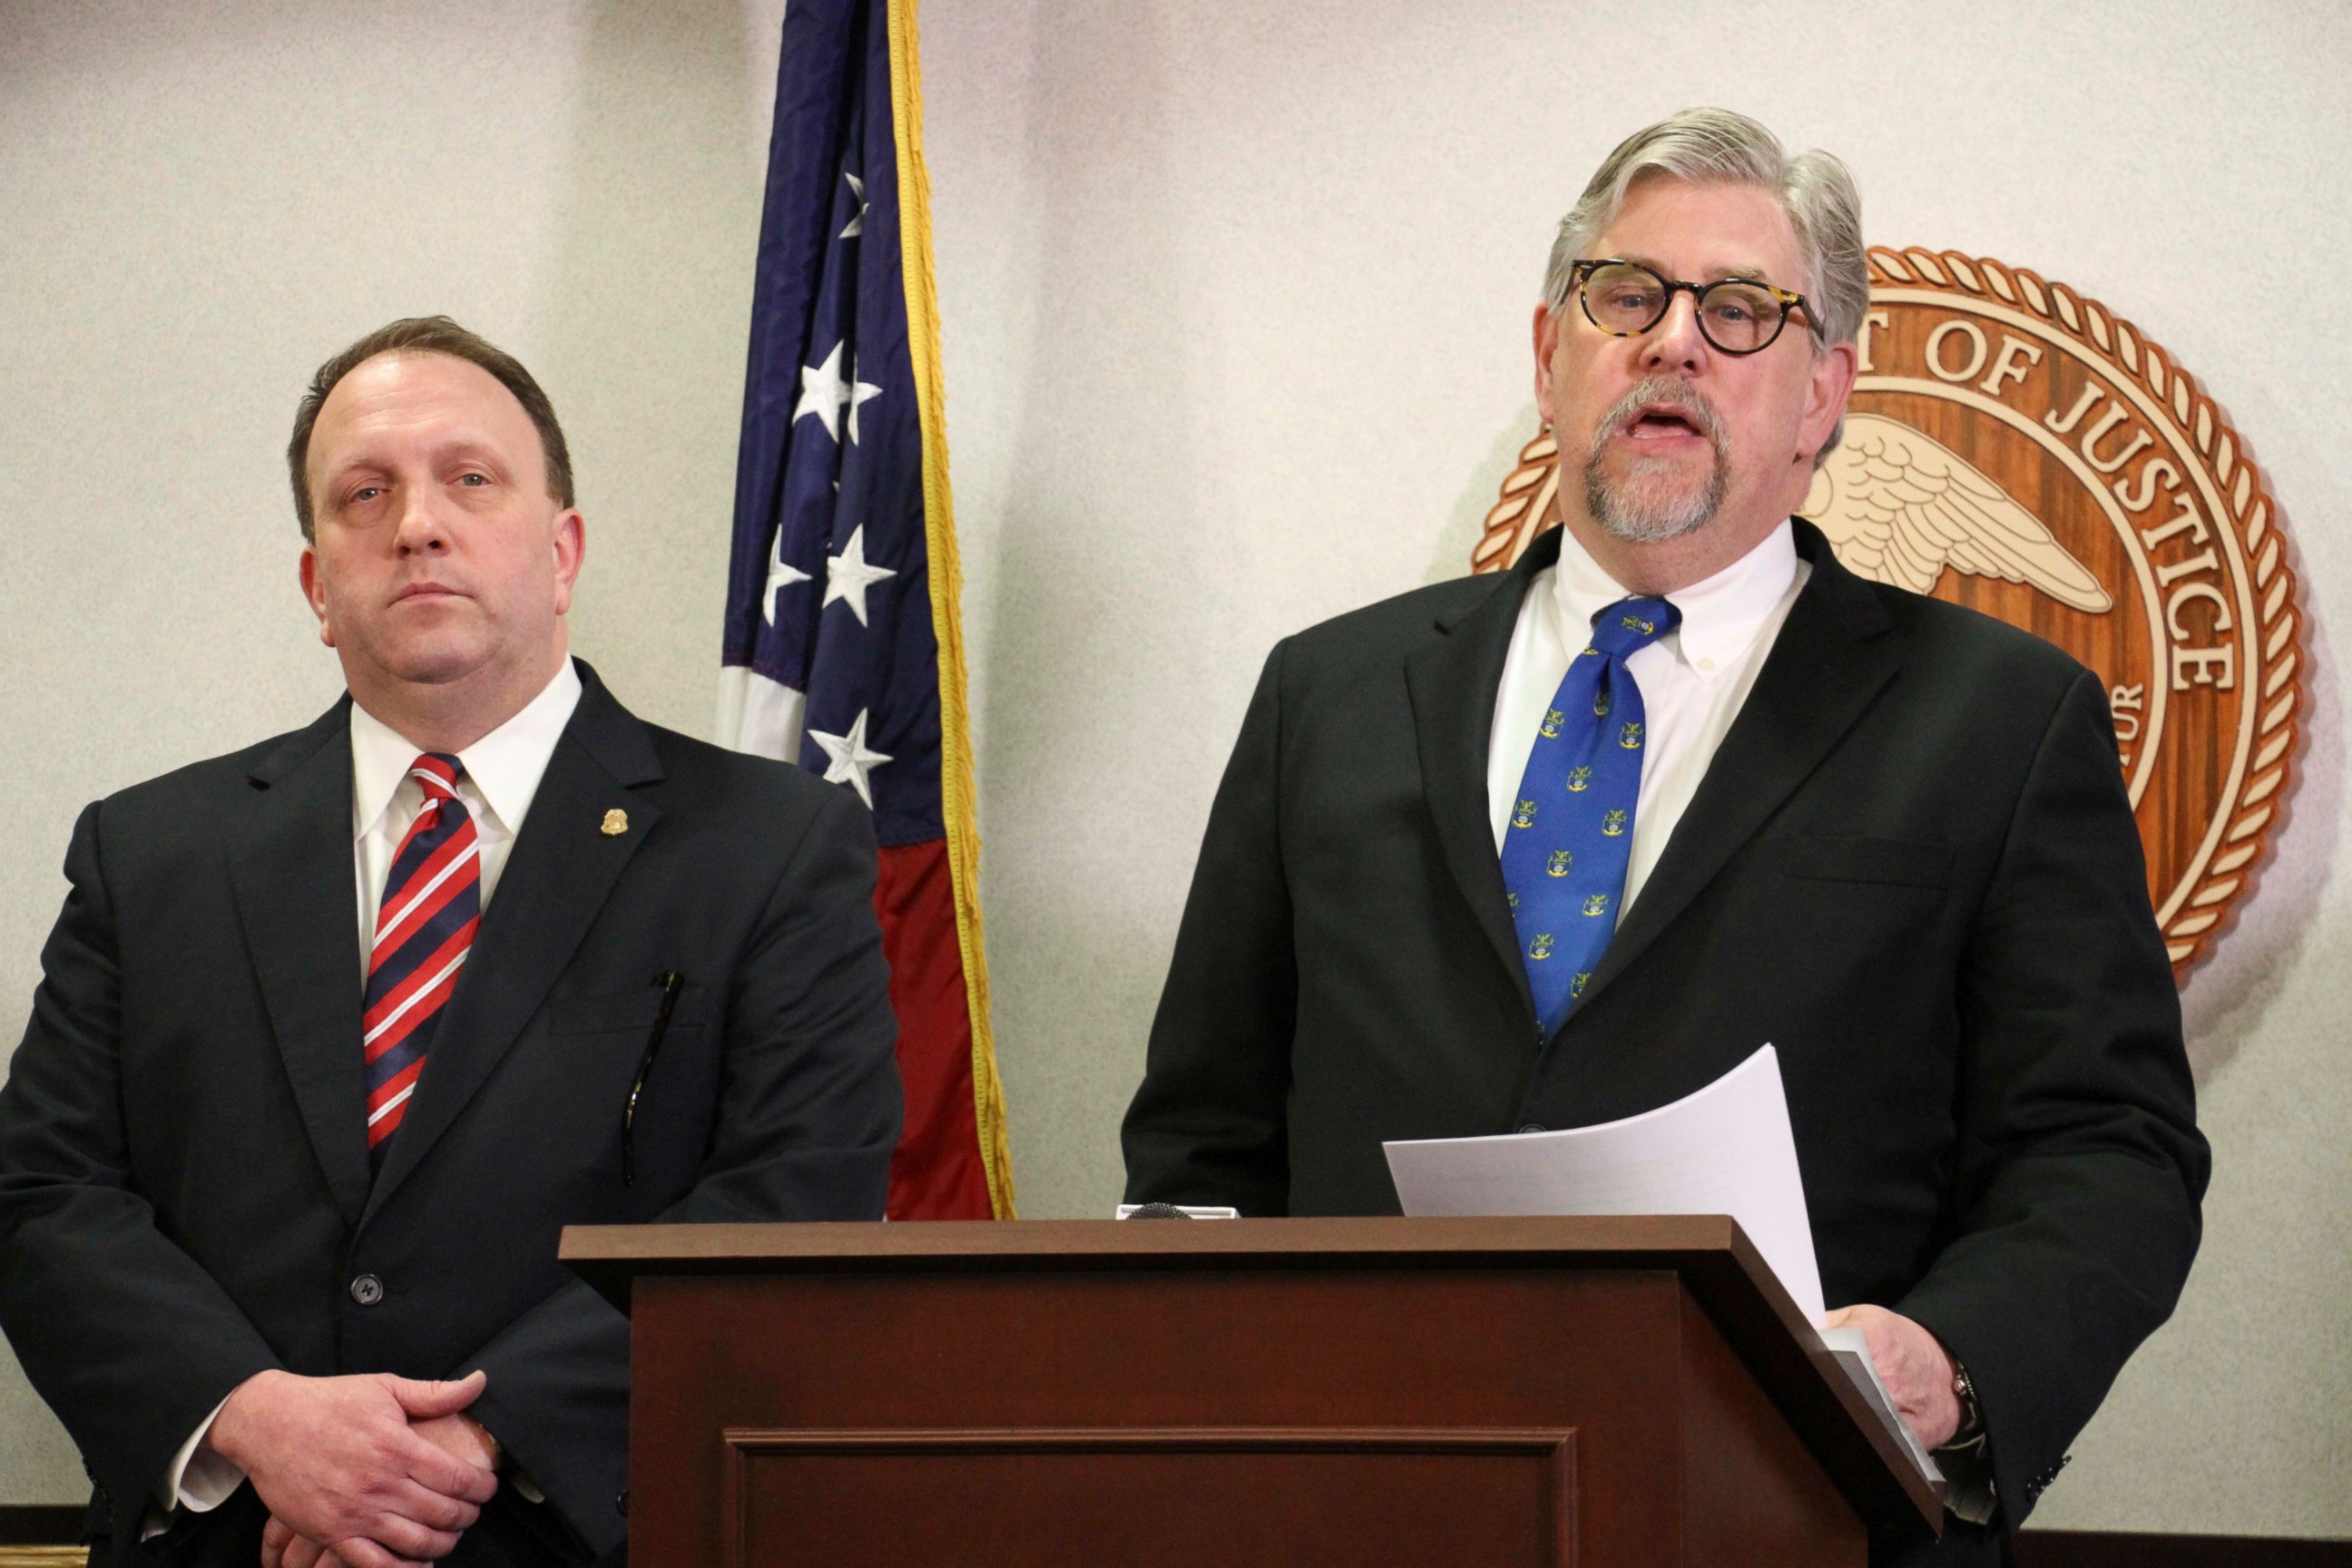 PHOTO: Jeffery Peterson, of the Anchorage FBI office, left, and Bryan Schroder, Alaska's U.S. Attorney, right, announce members of a gang operating in Alaska have been charged in a racketing enterprise in Anchorage, Alaska, Wednesday, March 27, 2019.